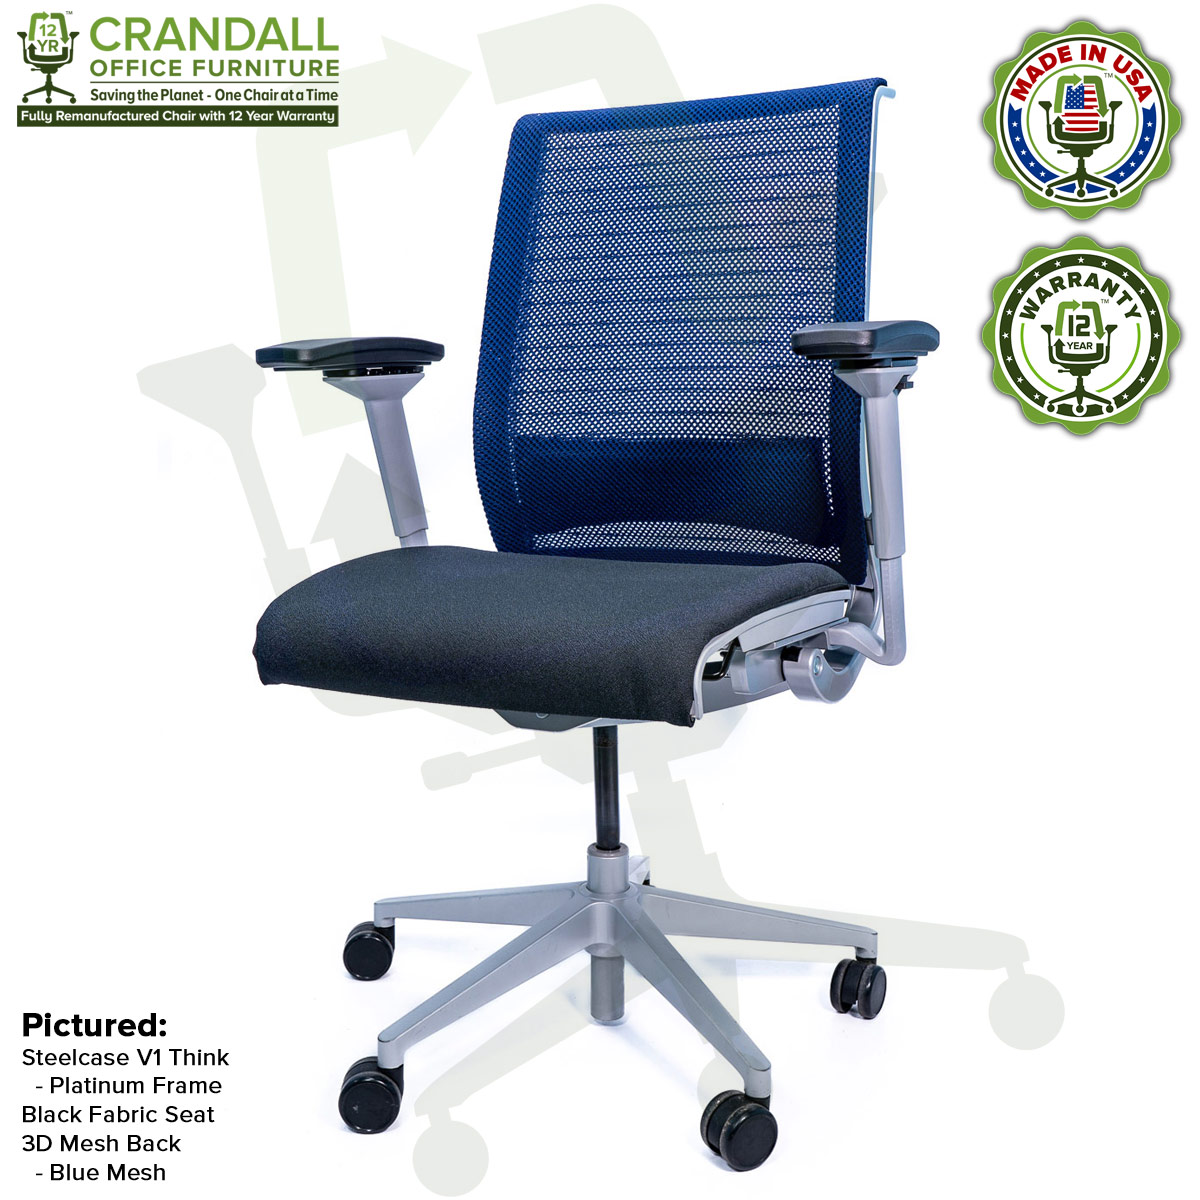 Crandall Office Furniture Remanufactured Steelcase Think Chair with 12 Year Warranty - Platinum Frame - Blue Mesh